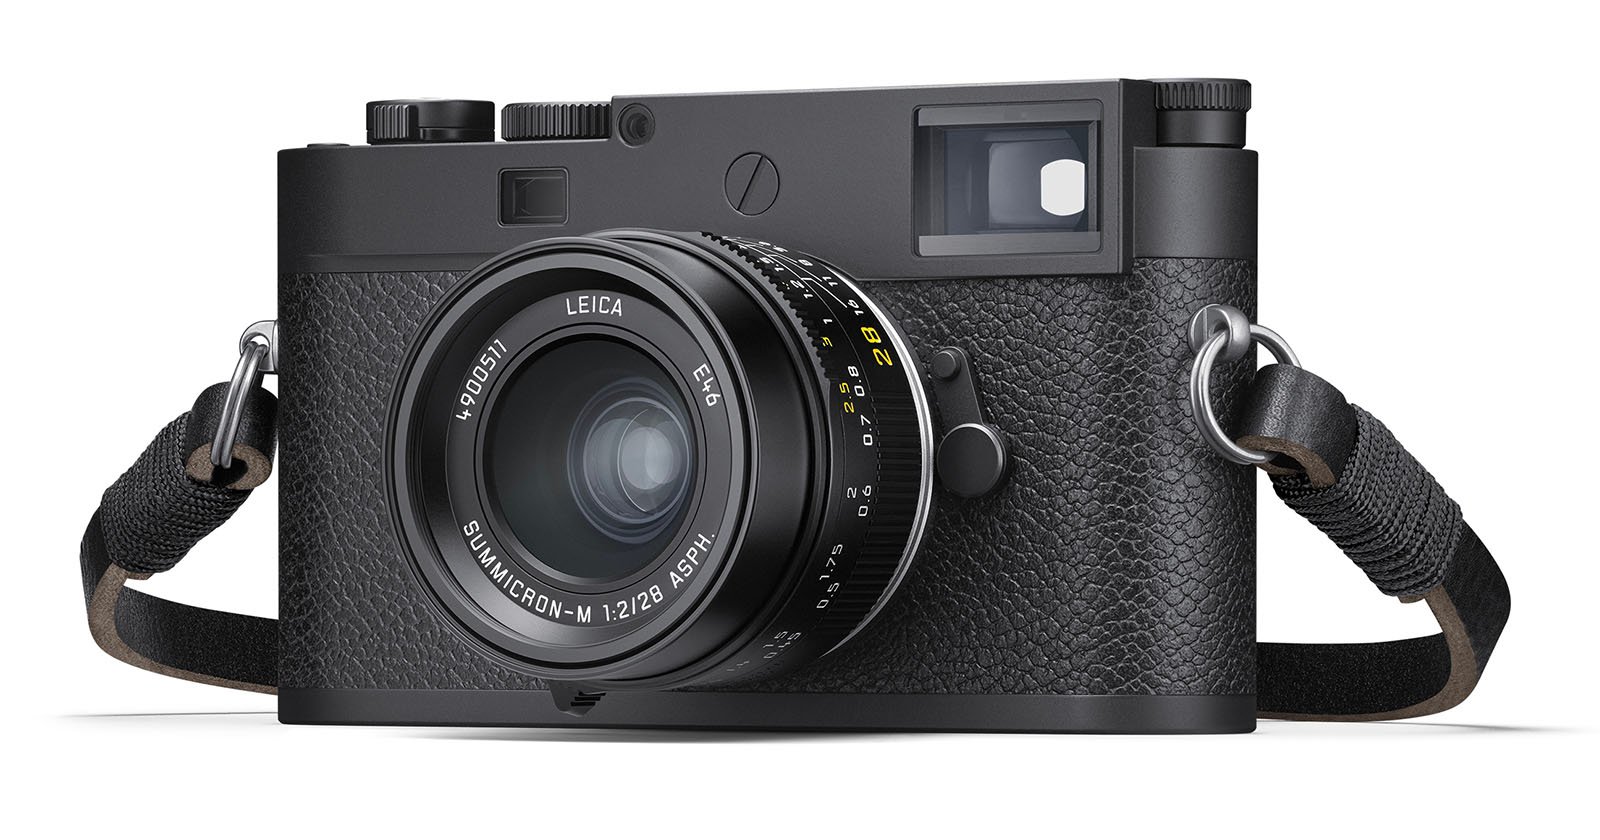 Leica M11-P Is Worlds First Camera to Embrace Content Credentials